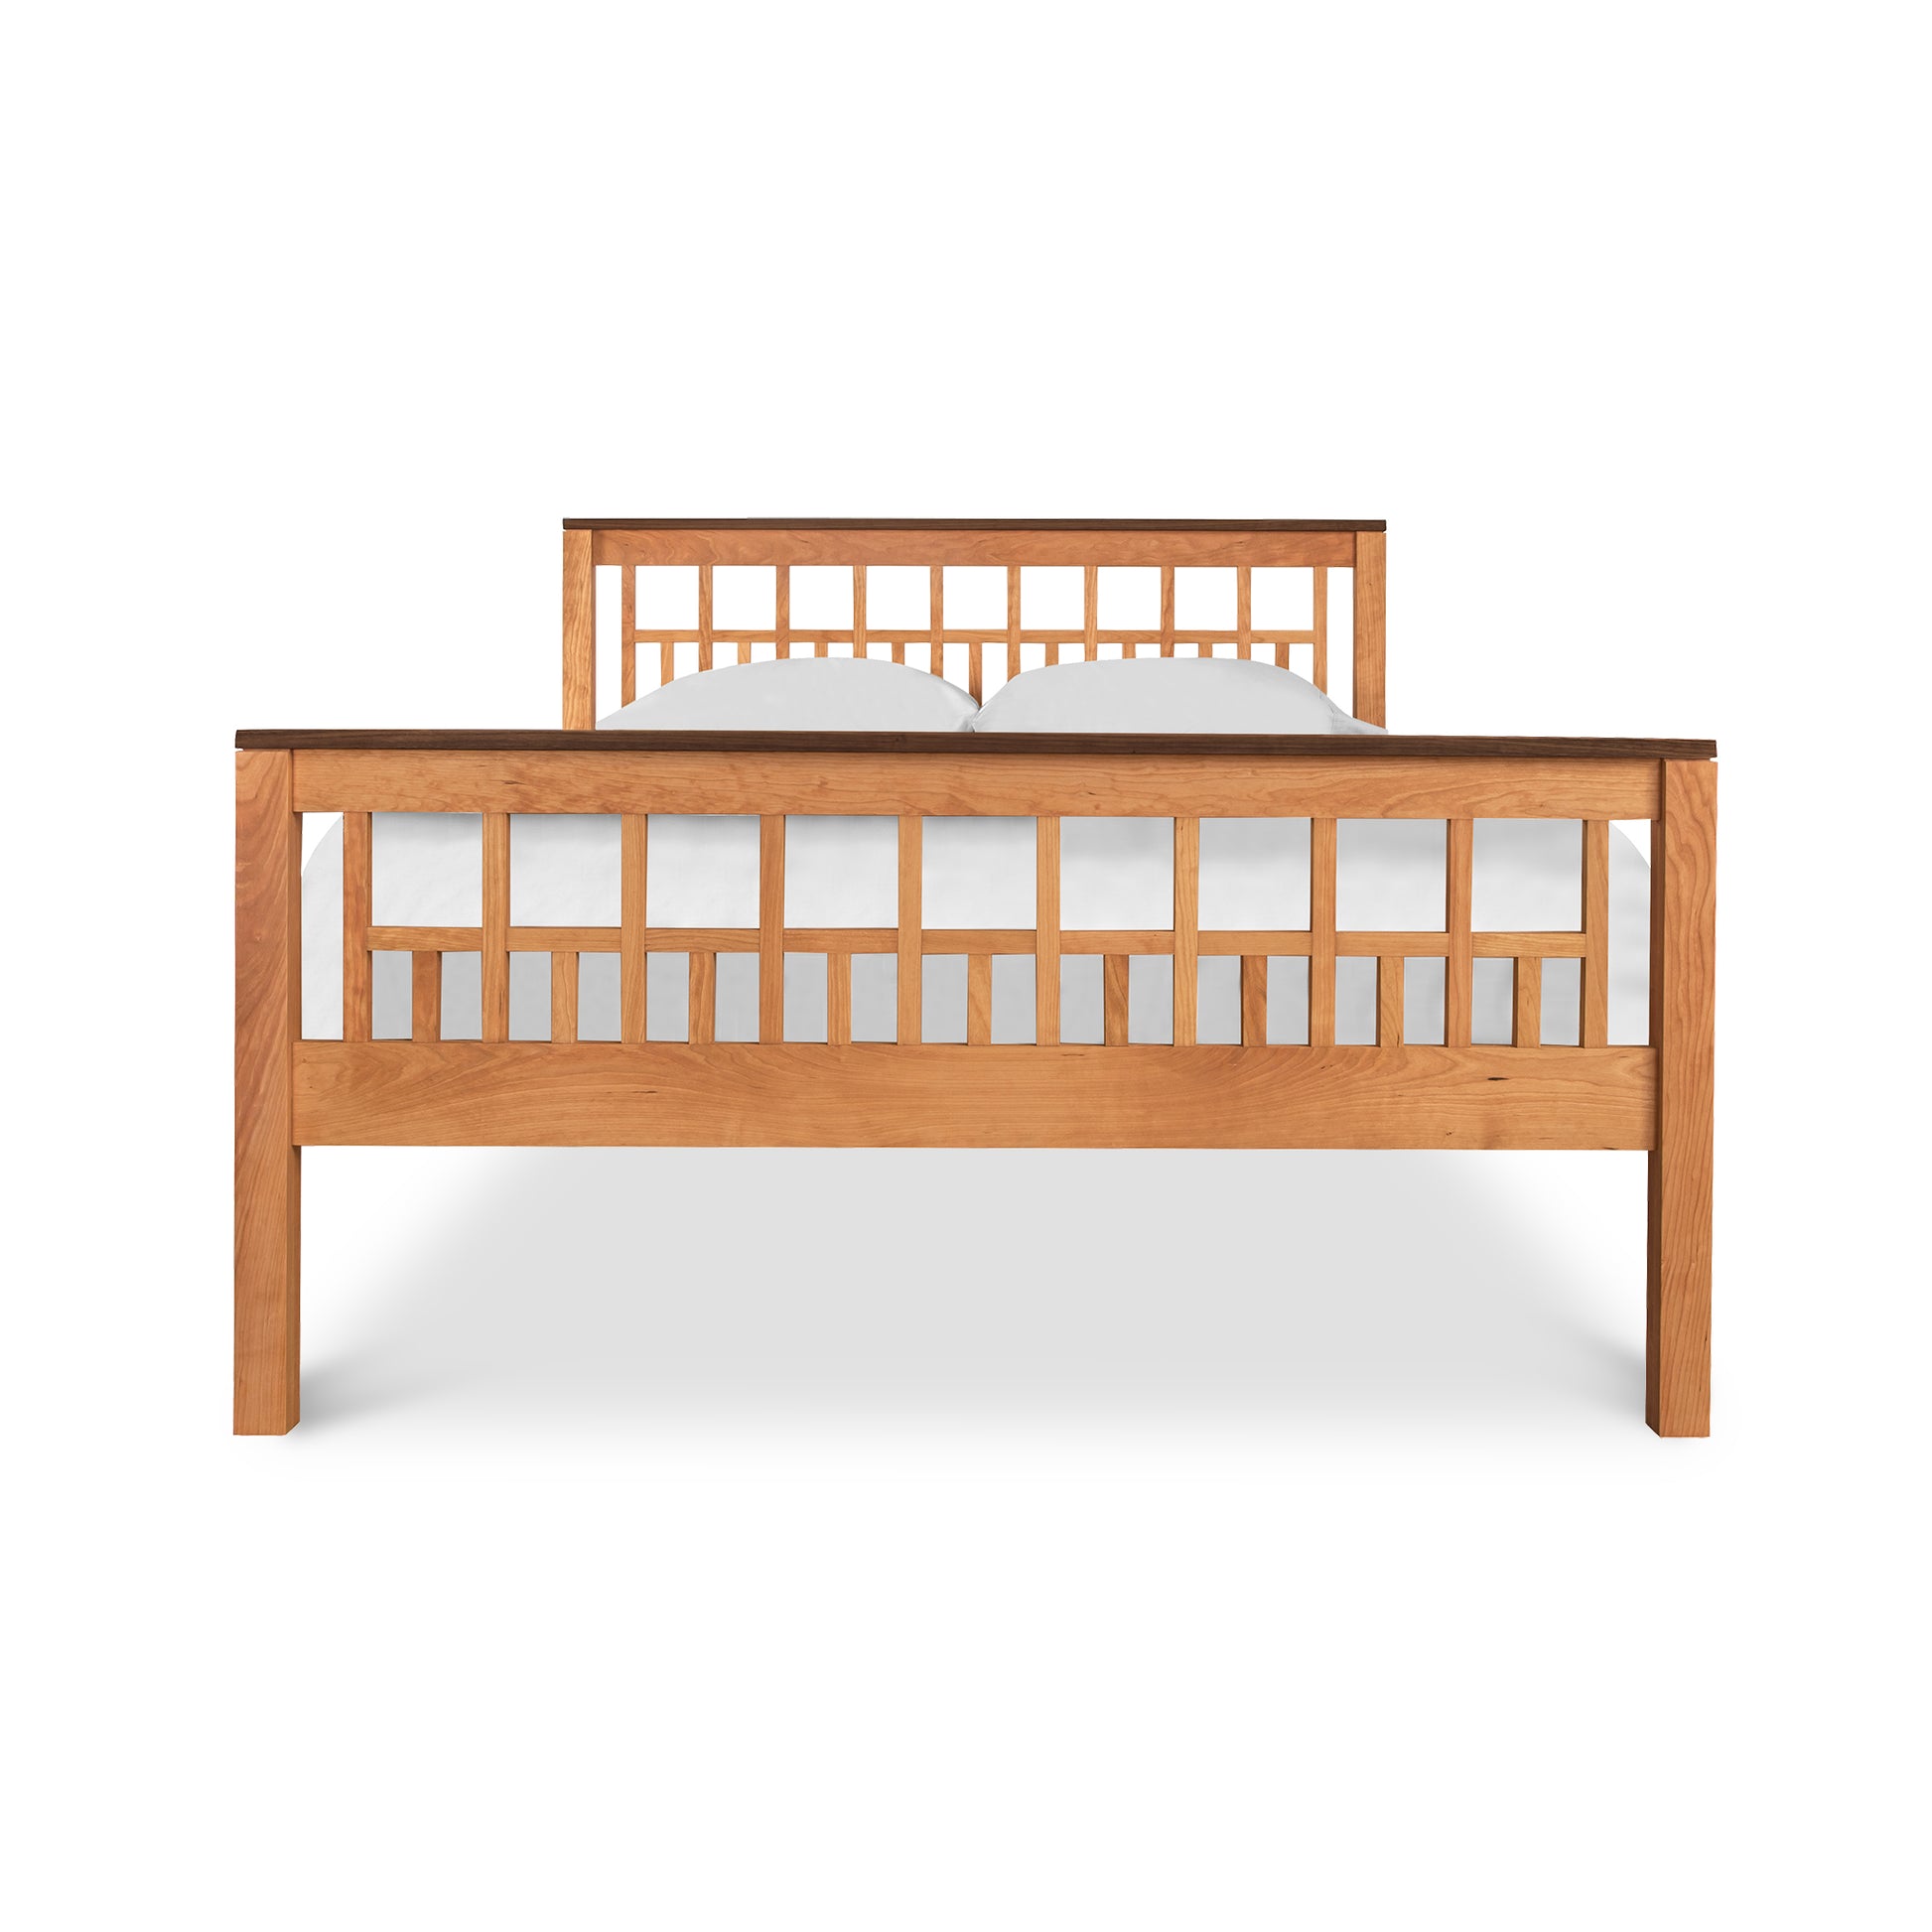 A wooden bed frame with a headboard and footboard featuring a grid-like panel design, isolated on a white background, known as the Vermont Furniture Designs Modern American Trellis Bed.